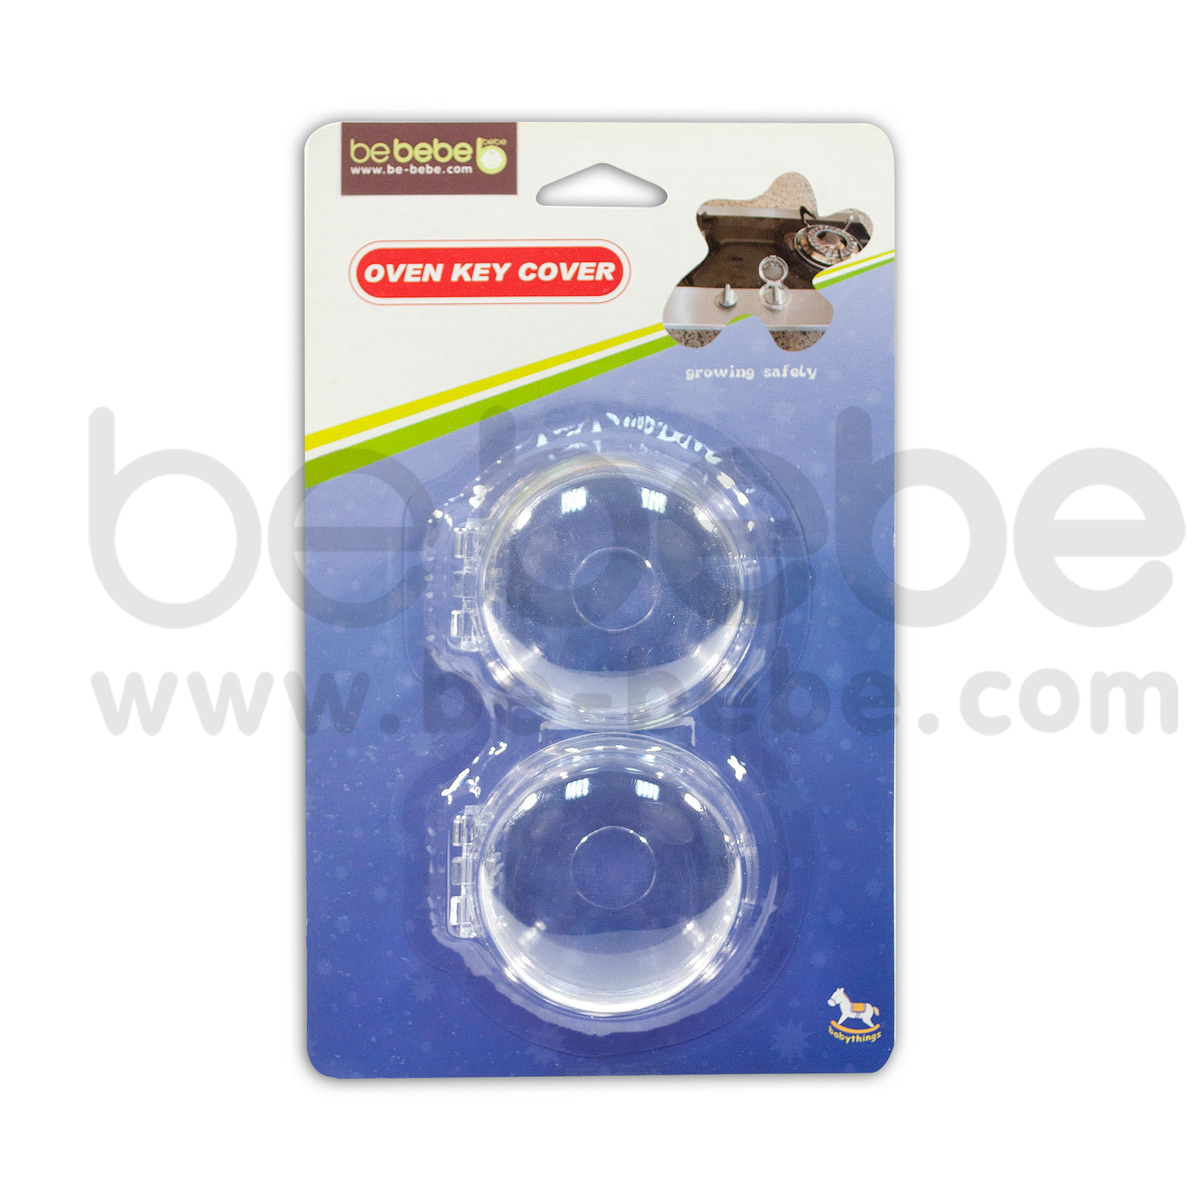 be bebe : Oven Knob Cover (Dia. 56mm.)